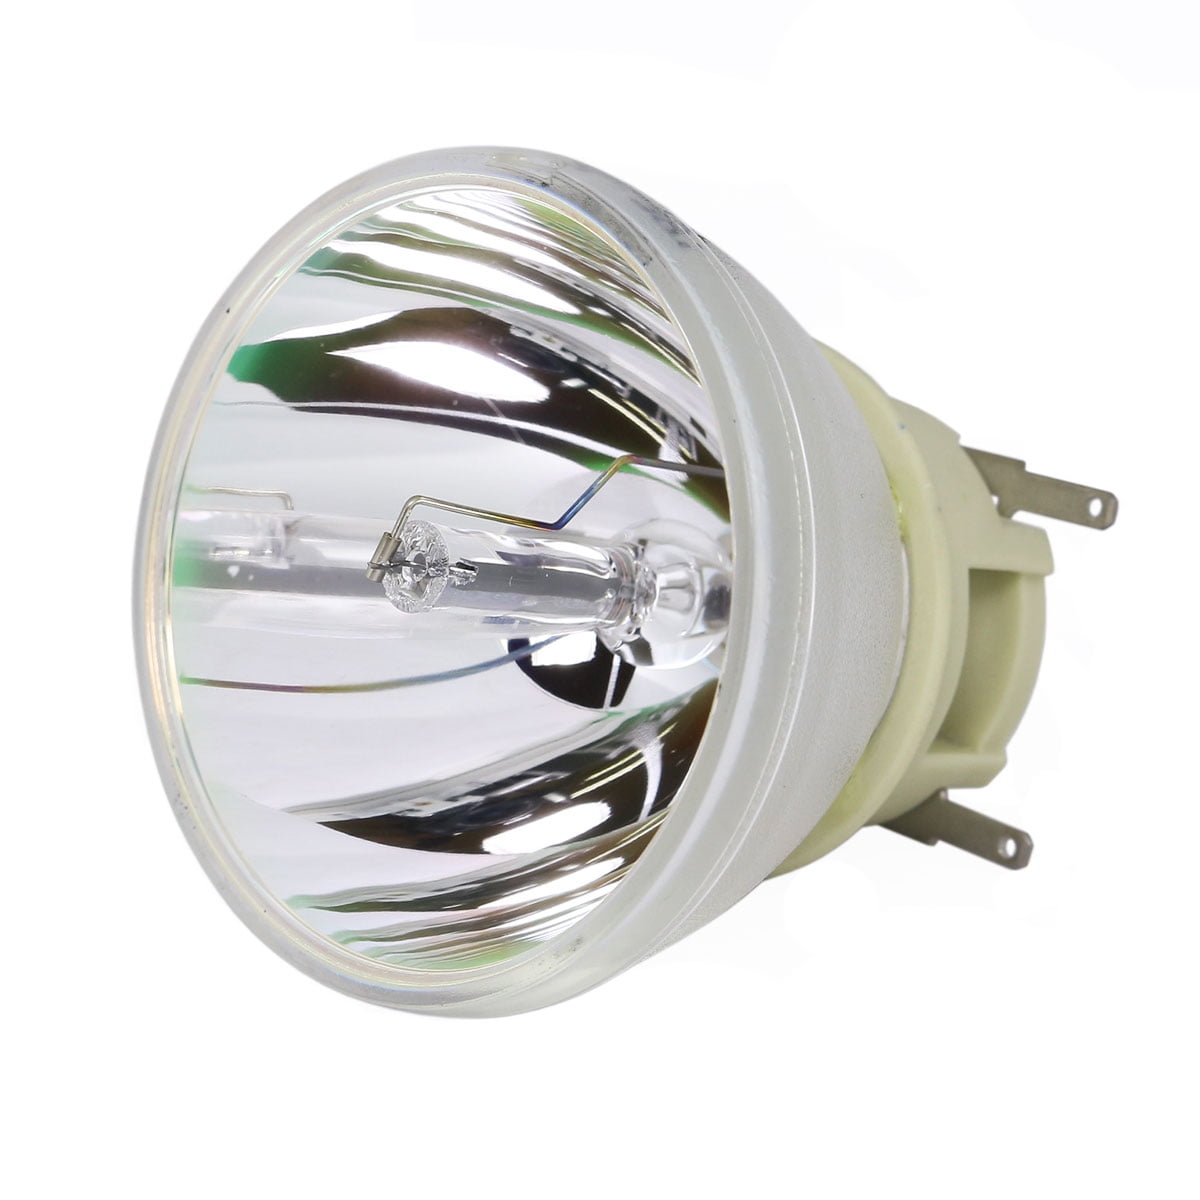 Original Philips Projector Lamp Replacement for BenQ 5J.J7L05.001 (Bulb Only) Walmart Canada